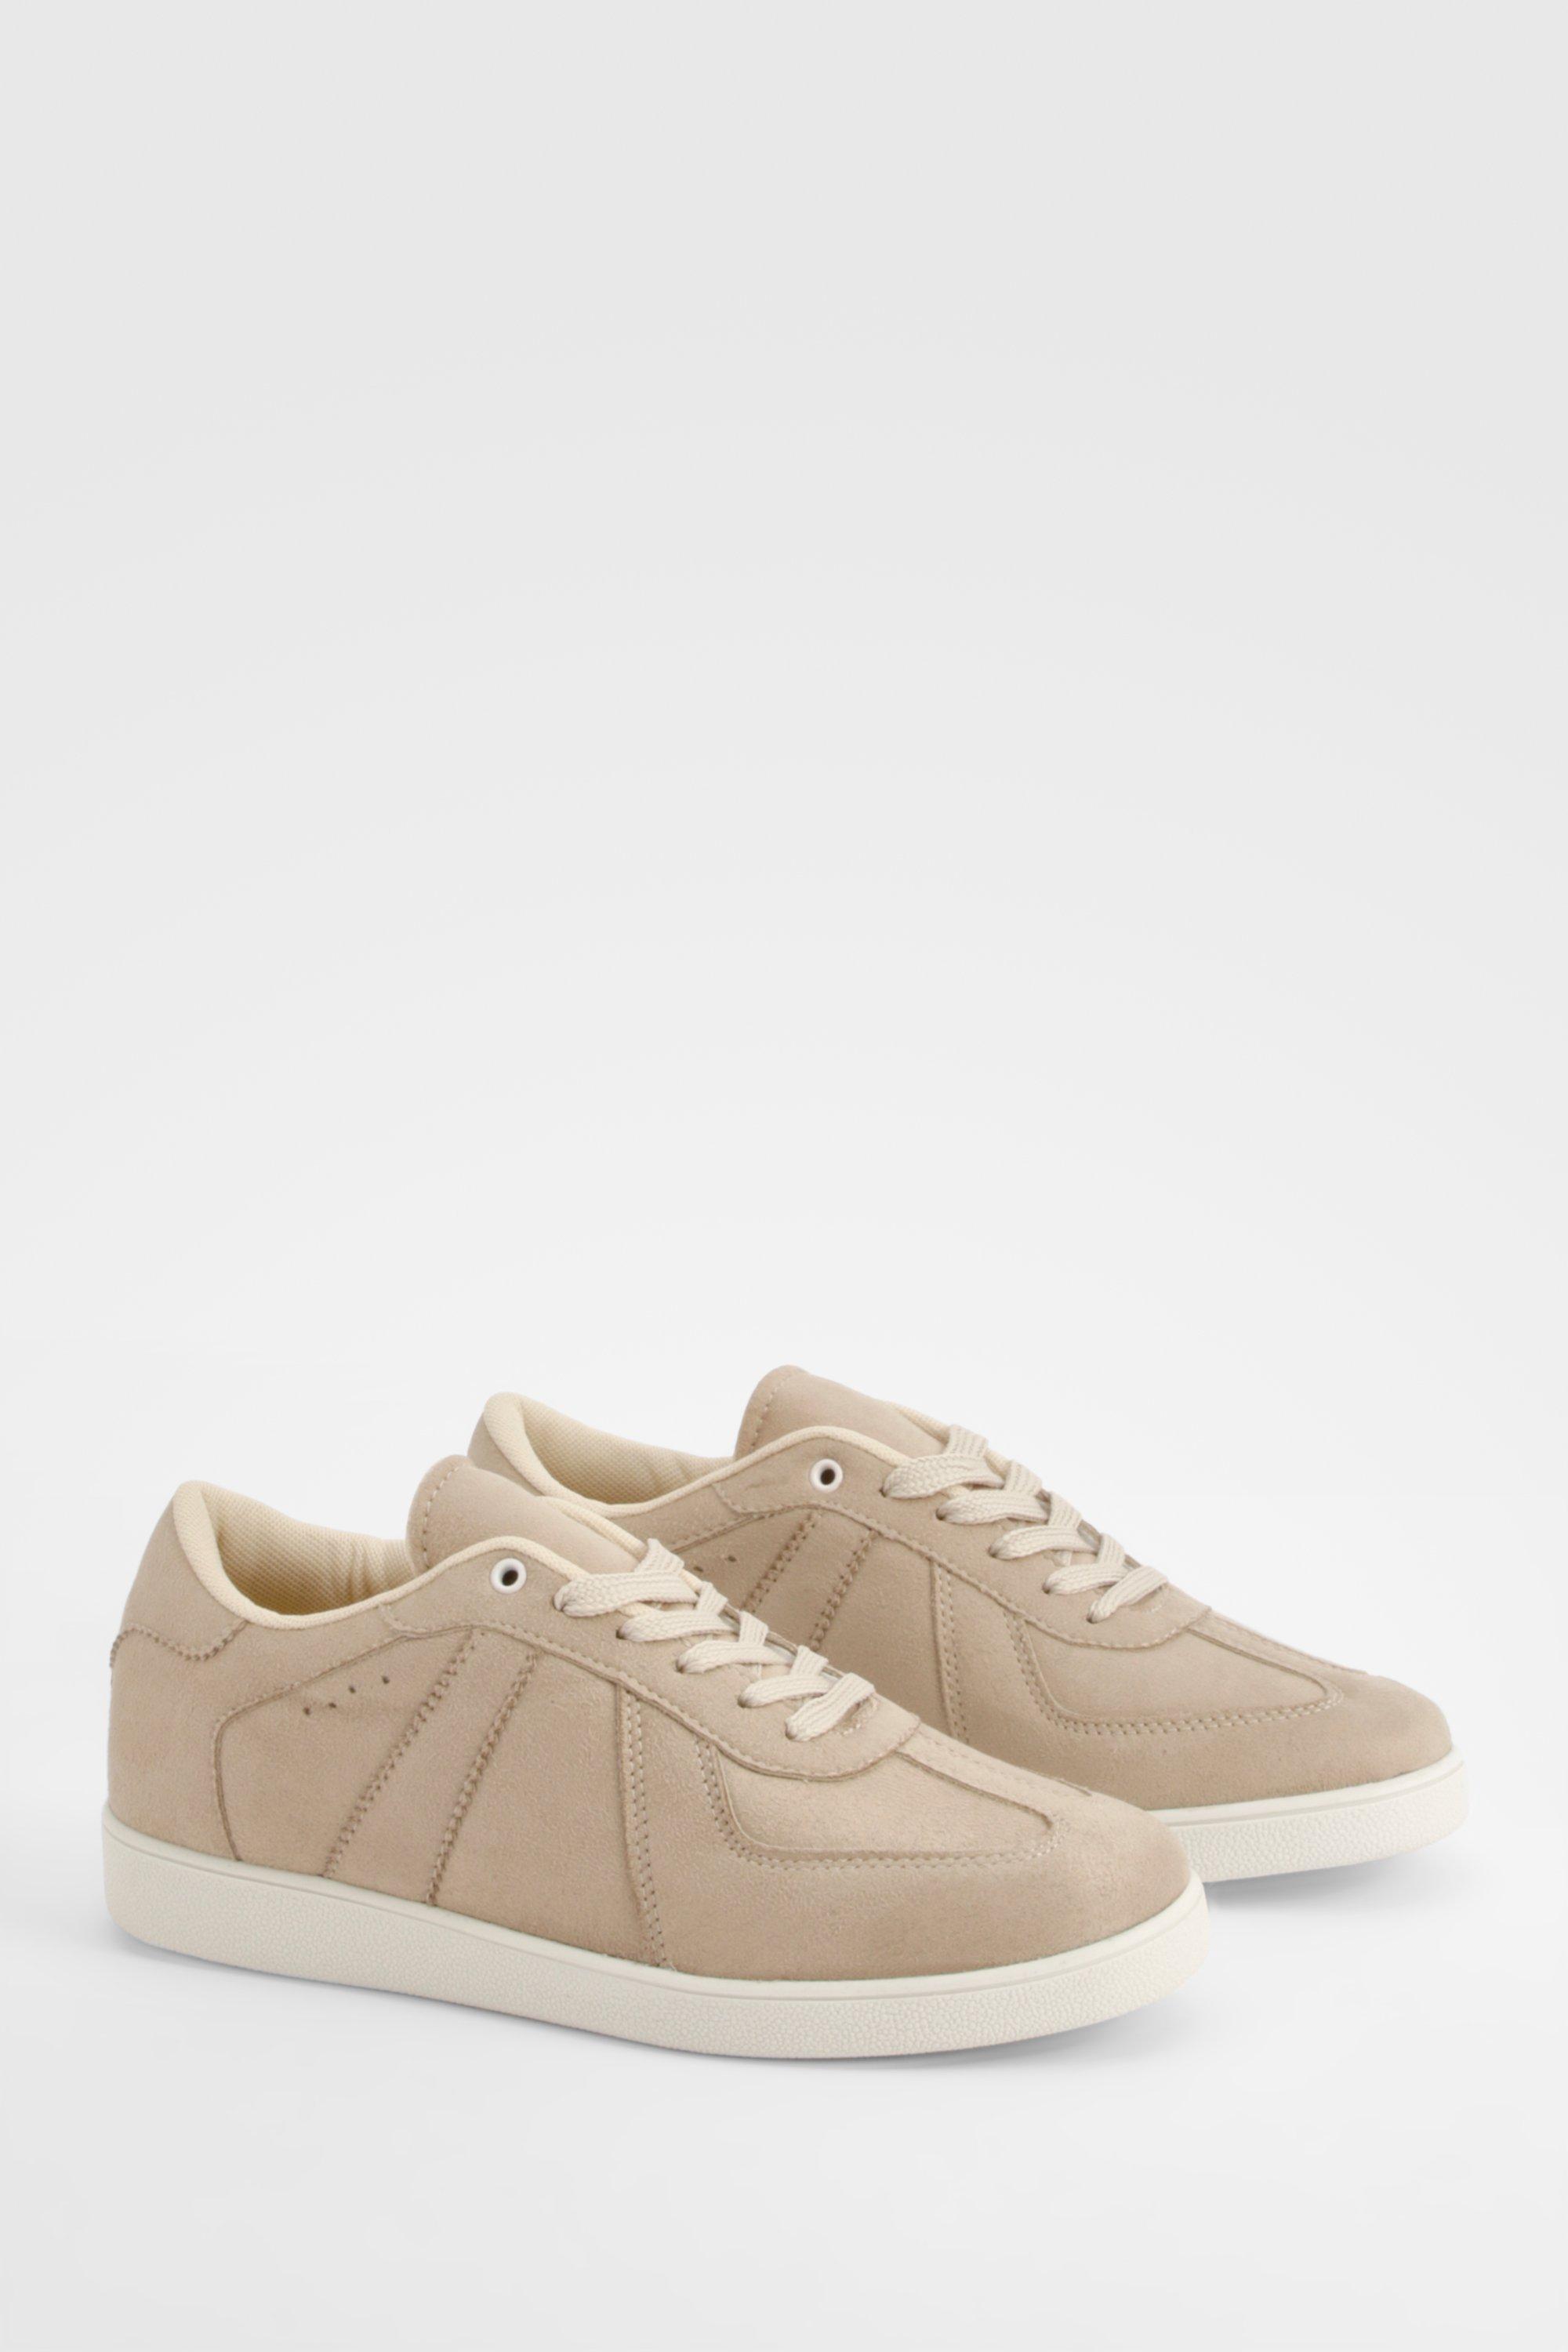 Image of Faux Suede Panel Flat Trainers, Beige